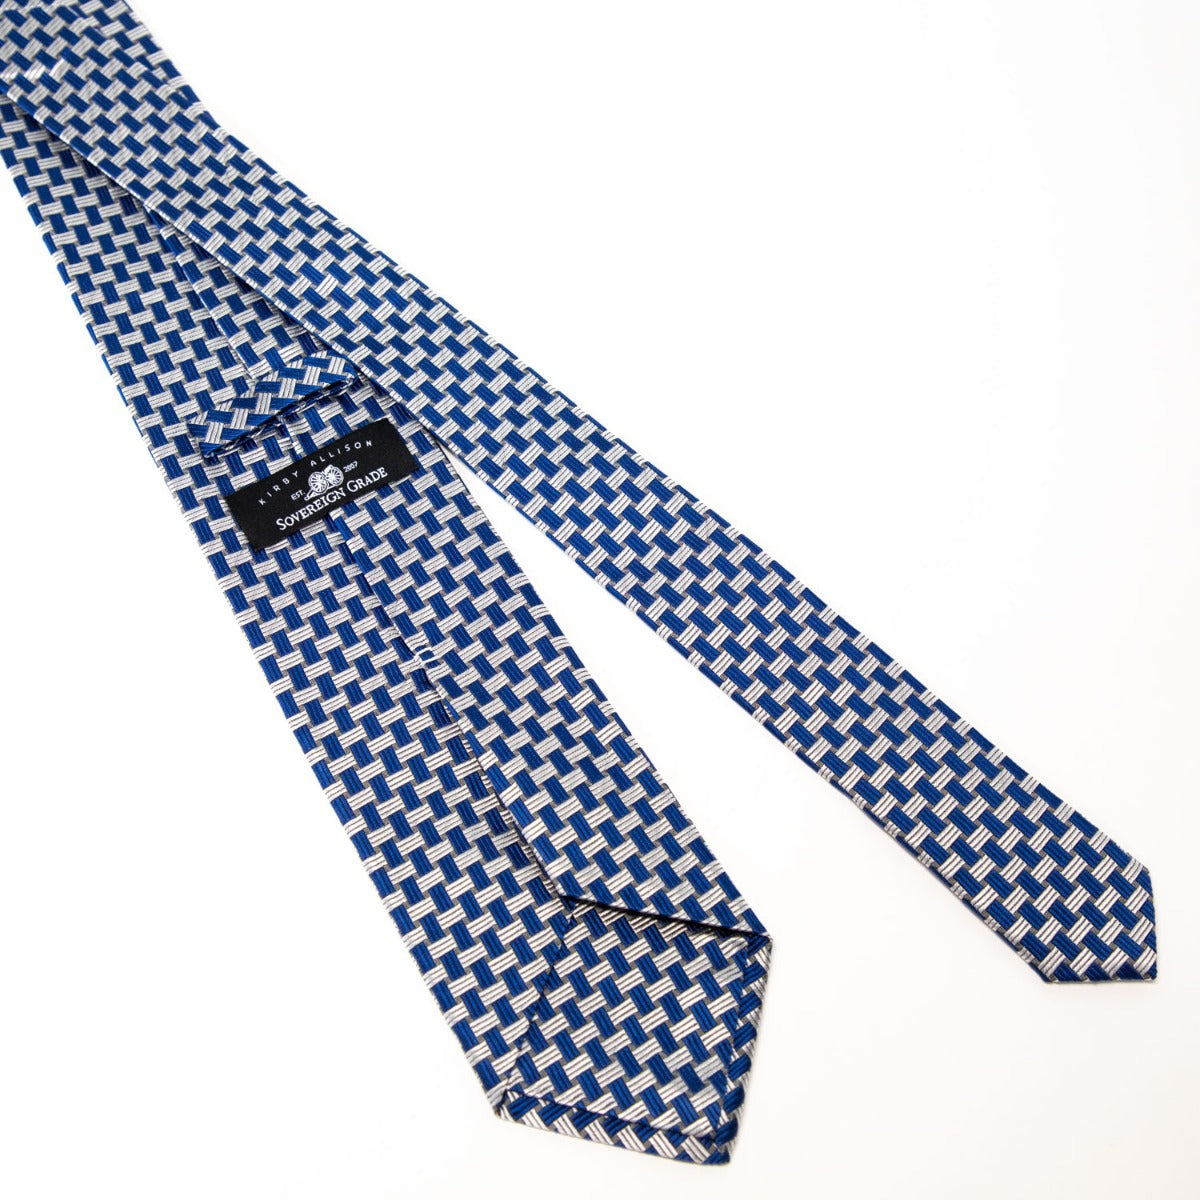 A Sovereign Grade Blue Basket Weave Silk Tie from KirbyAllison.com in a blue and white checkered pattern on a white surface.